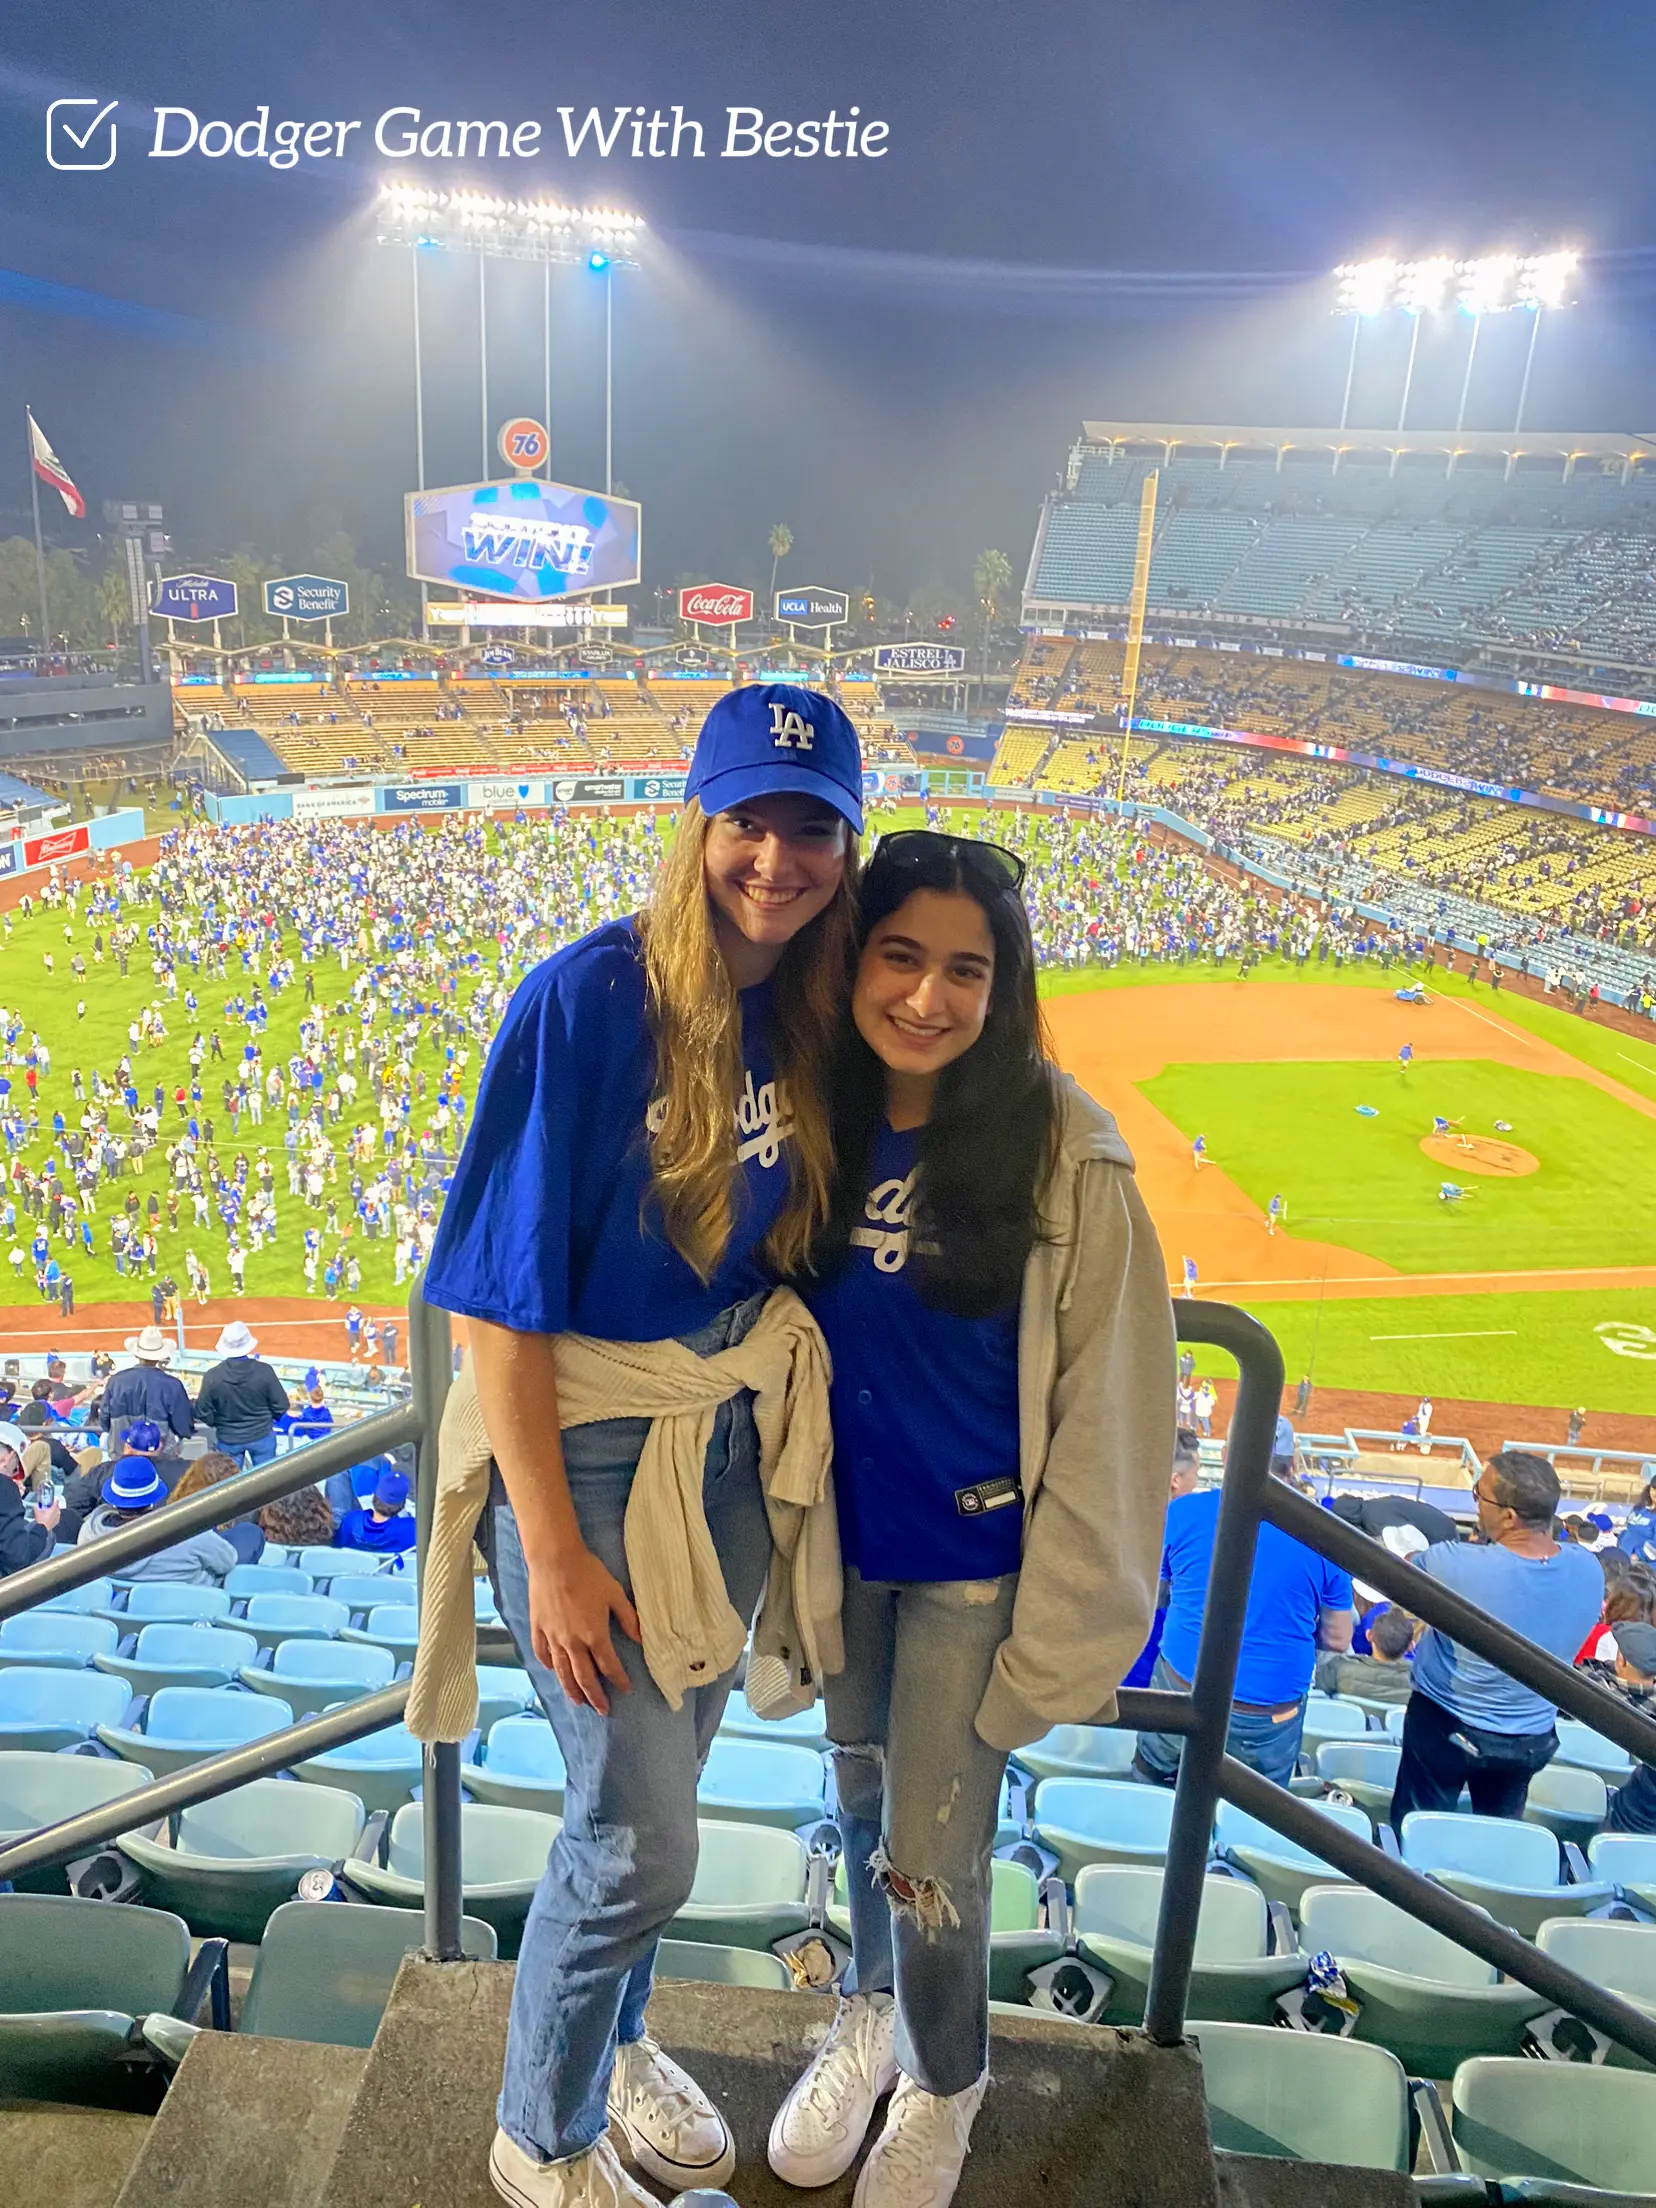 LA Dodgers Opening week game with my beautiful wife @jessicam.gomez 💙🔵  whatcha think bout the dodger fits for the day?